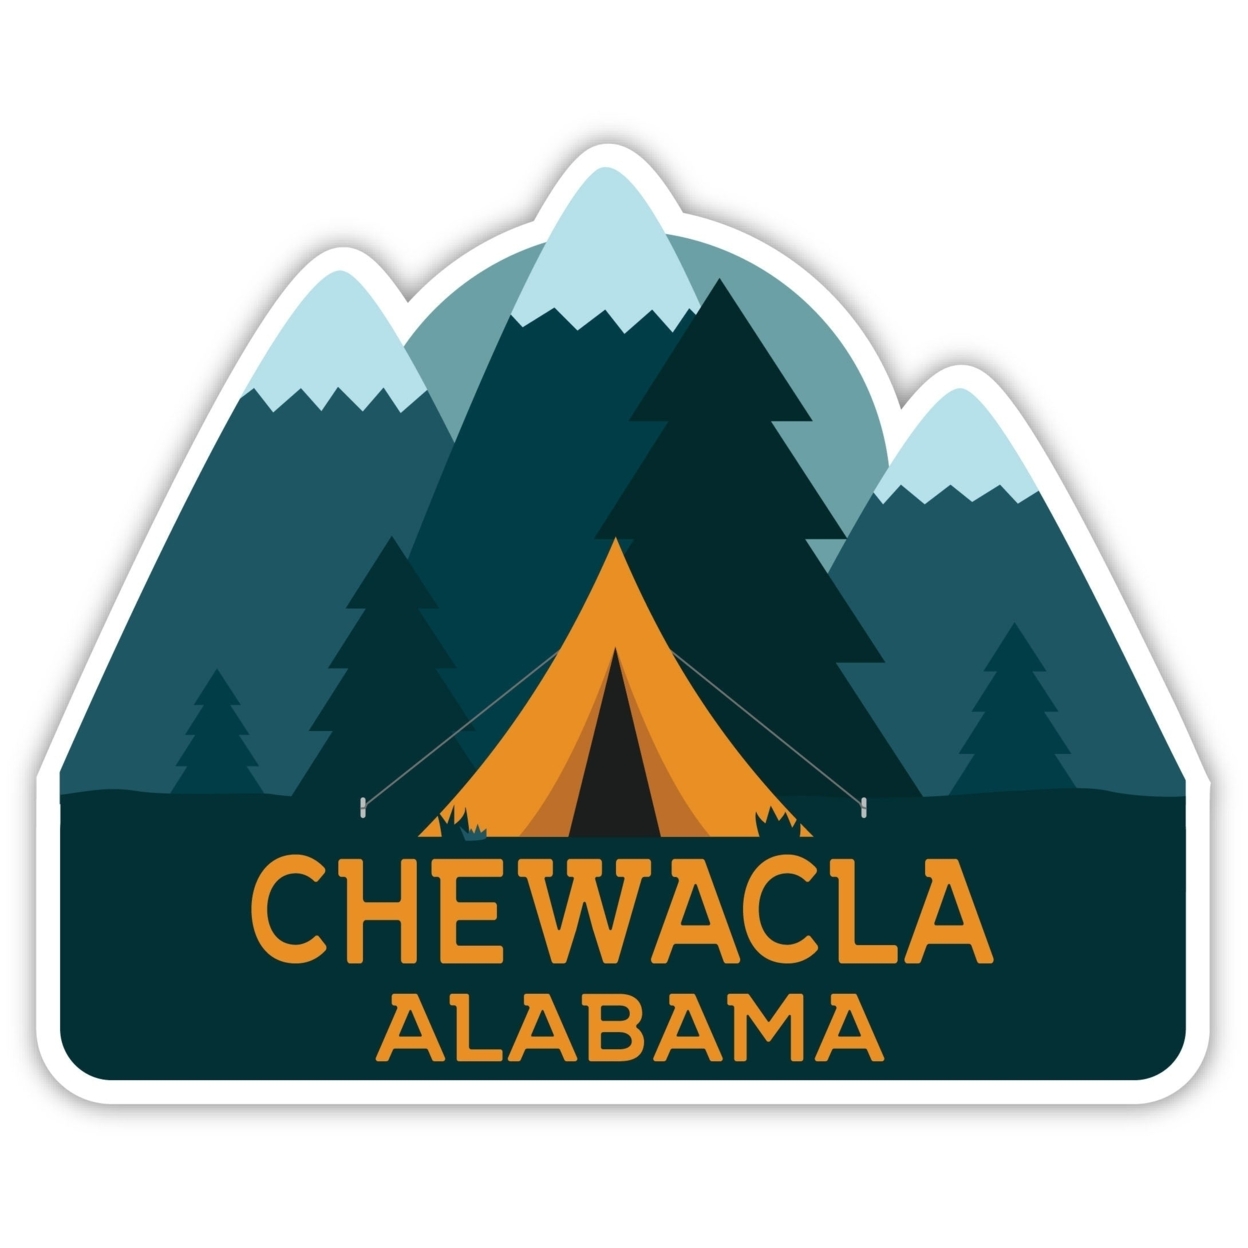 Chewacla Alabama Souvenir Decorative Stickers (Choose Theme And Size) - 4-Pack, 6-Inch, Tent